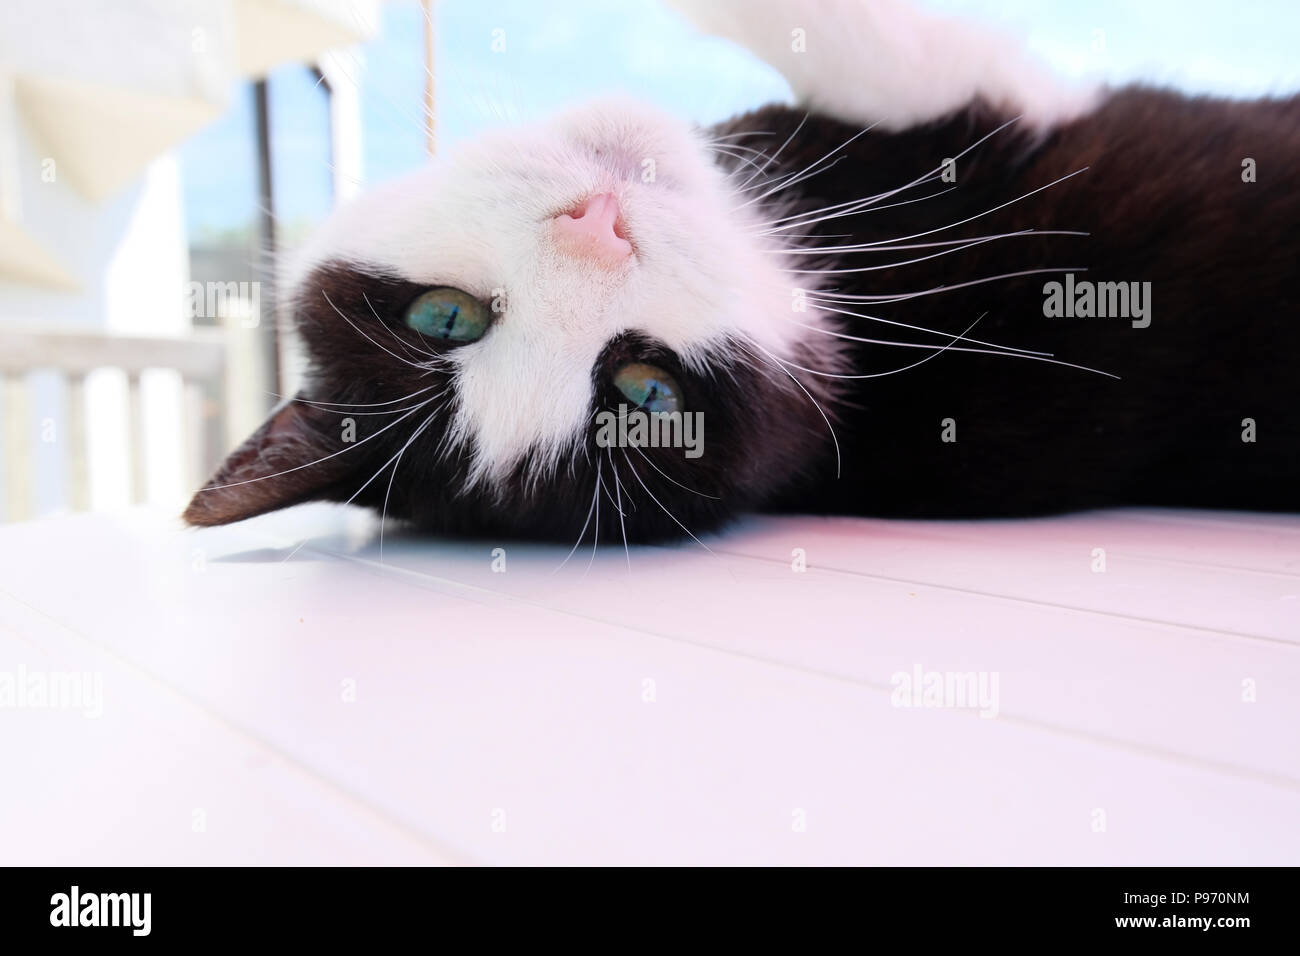 Black and white cat upside down on patio table making eye contact with camera Stock Photo